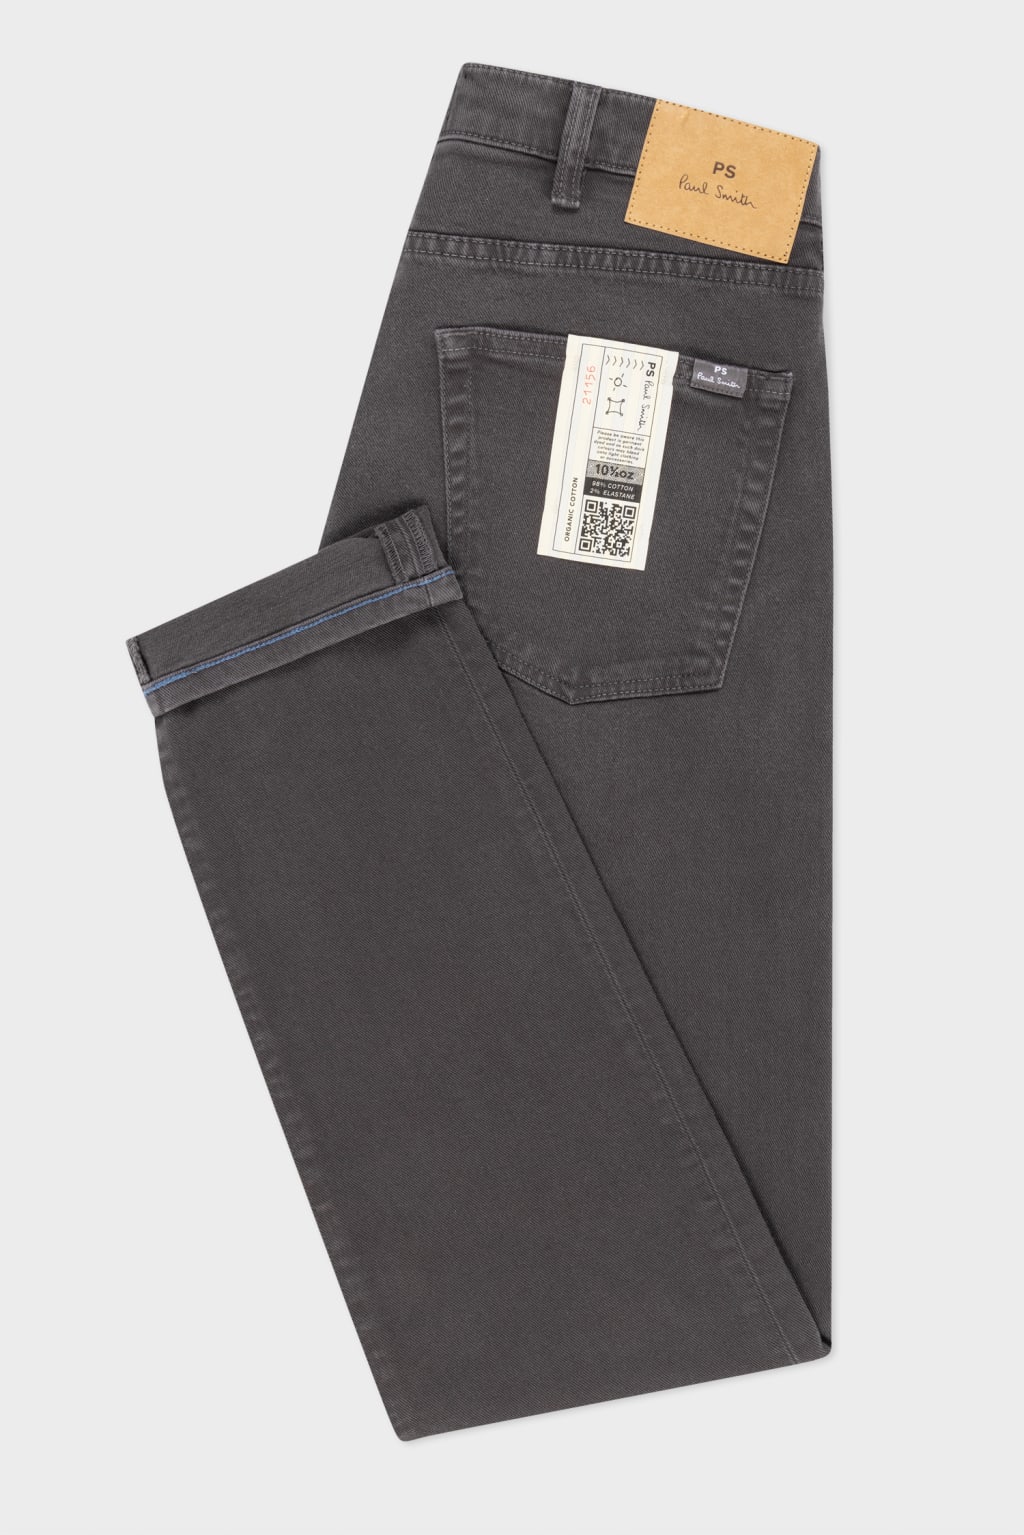 Front View - Tapered-Fit Dark Grey Garment-Dyed Jeans